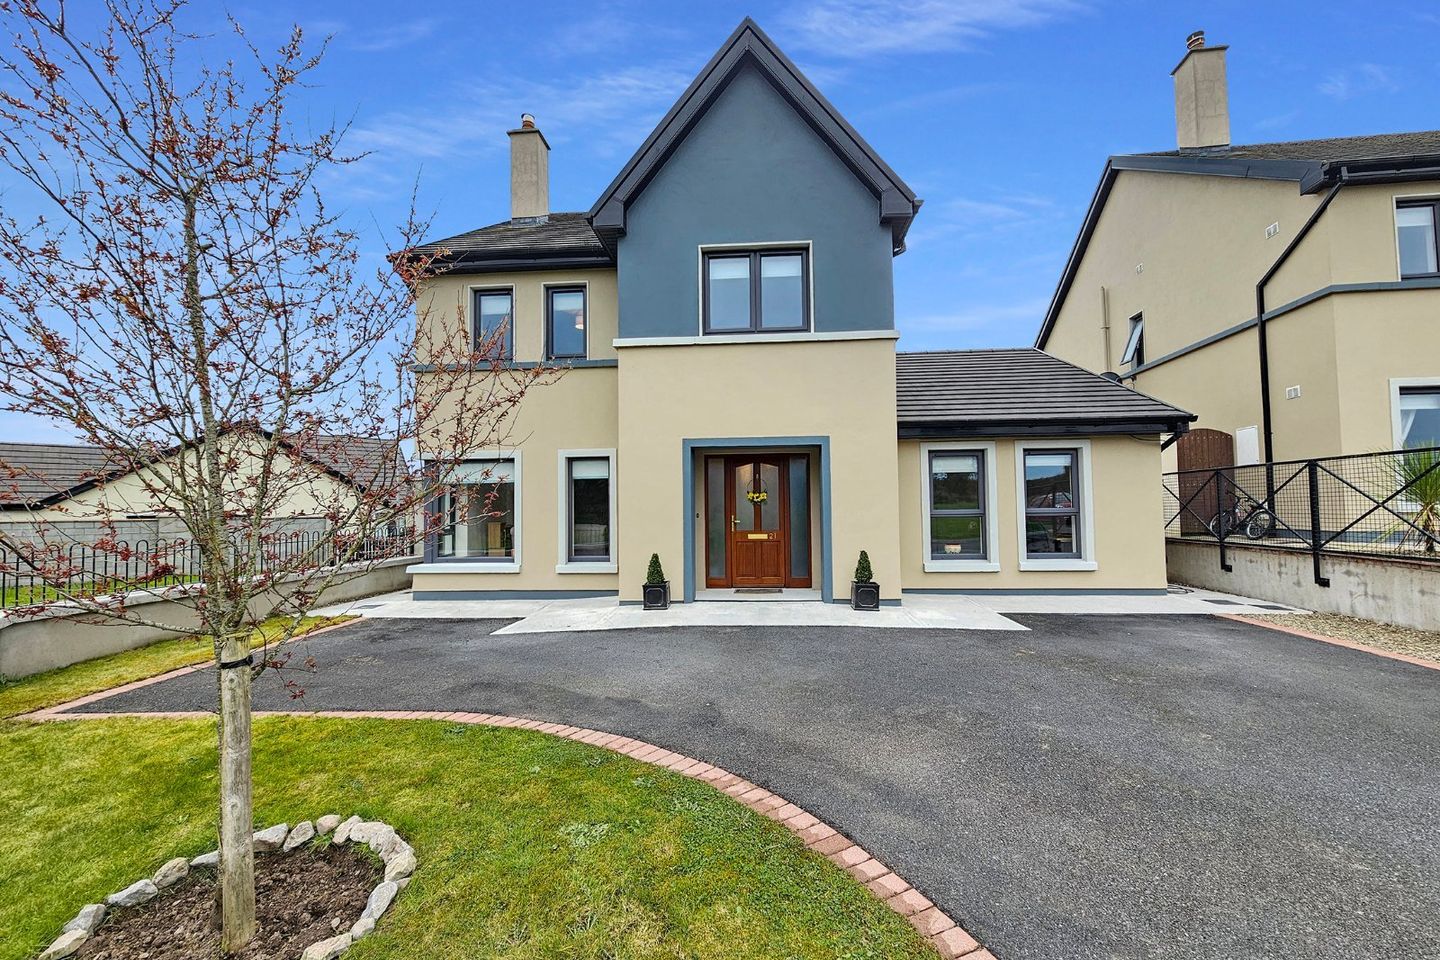 21 Meadow View, Clarecastle, Ennis, Co. Clare, V95KH7X